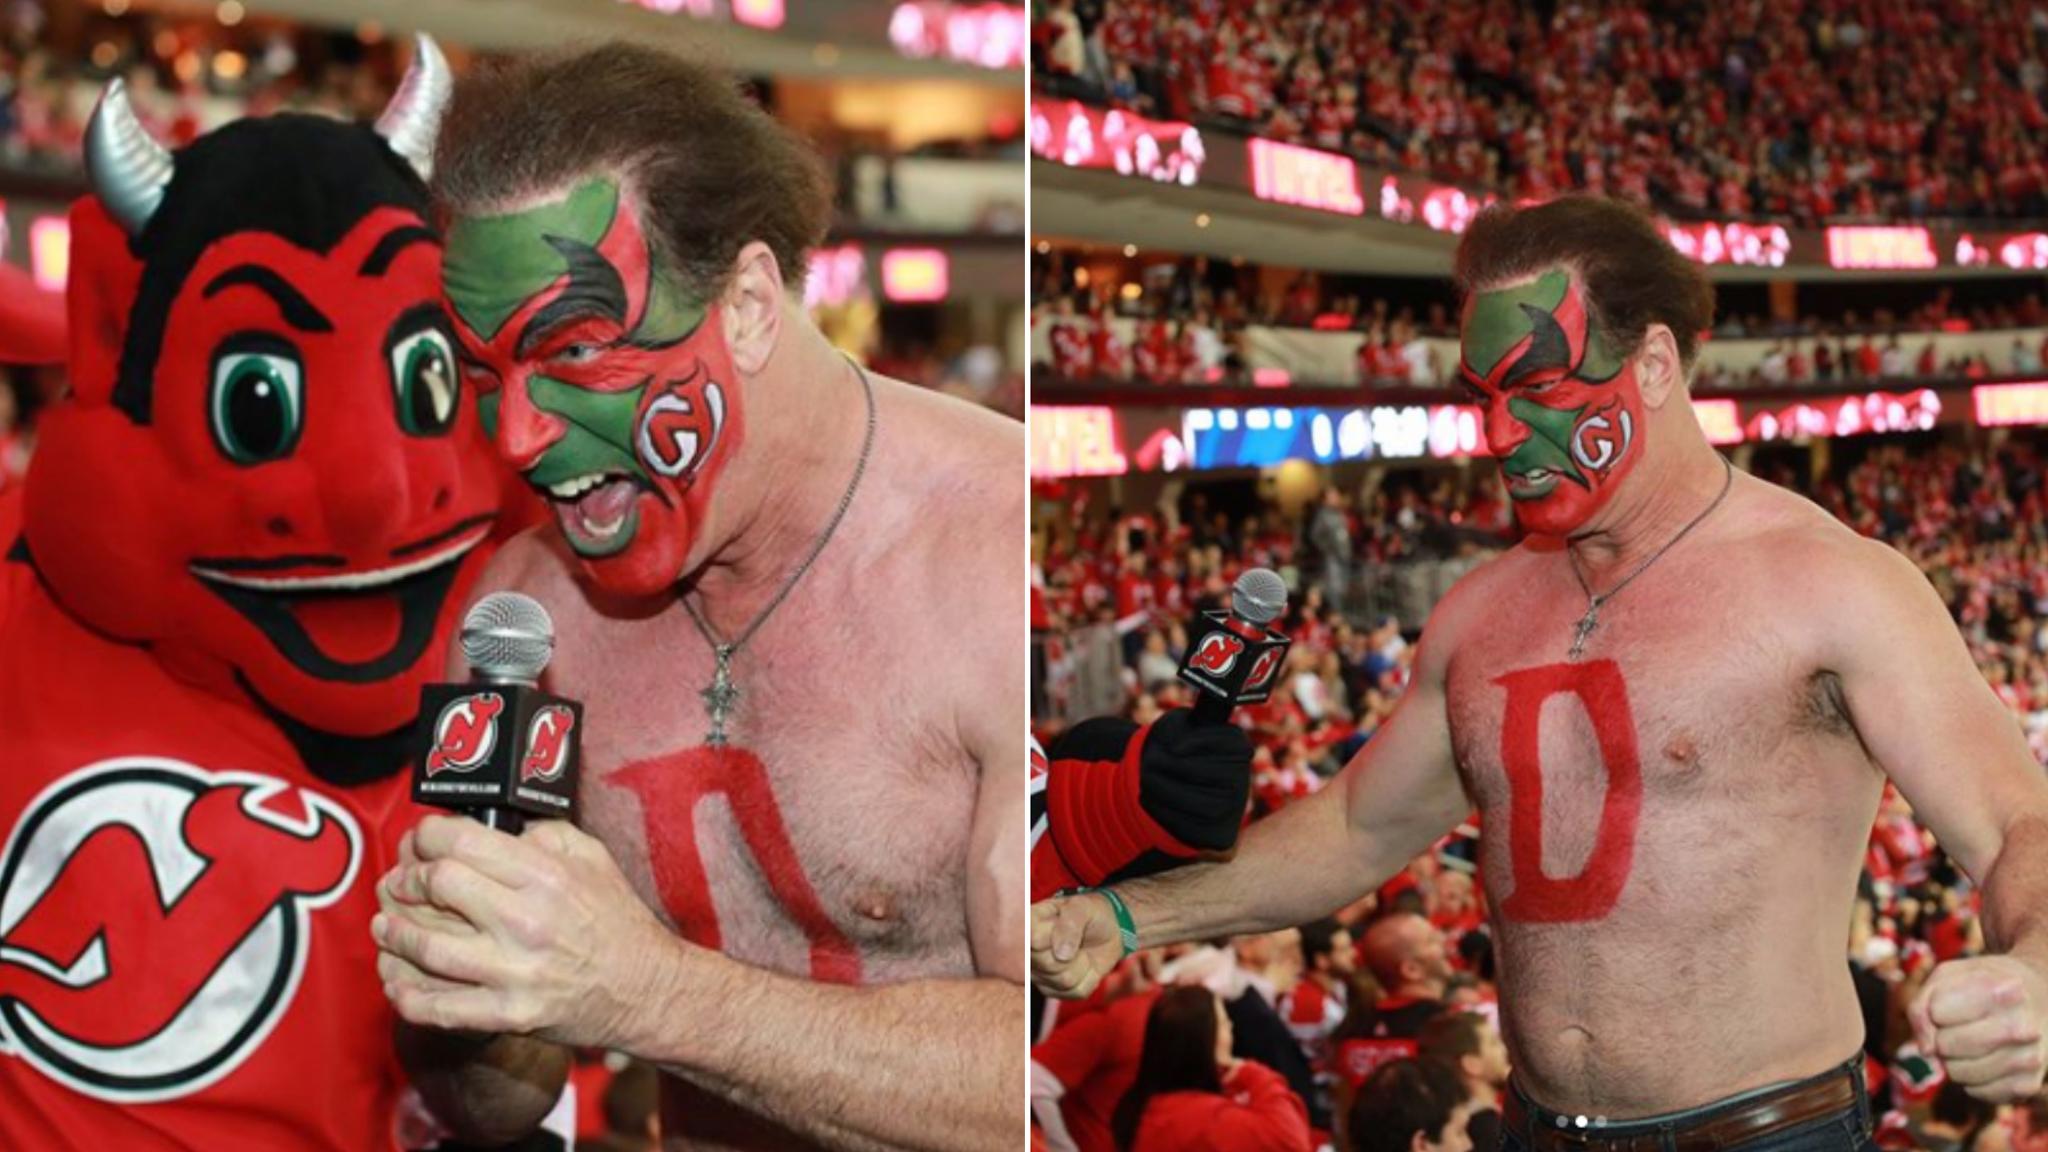 The Daily Czabe: Painted Puddy, Rocks The Devils!